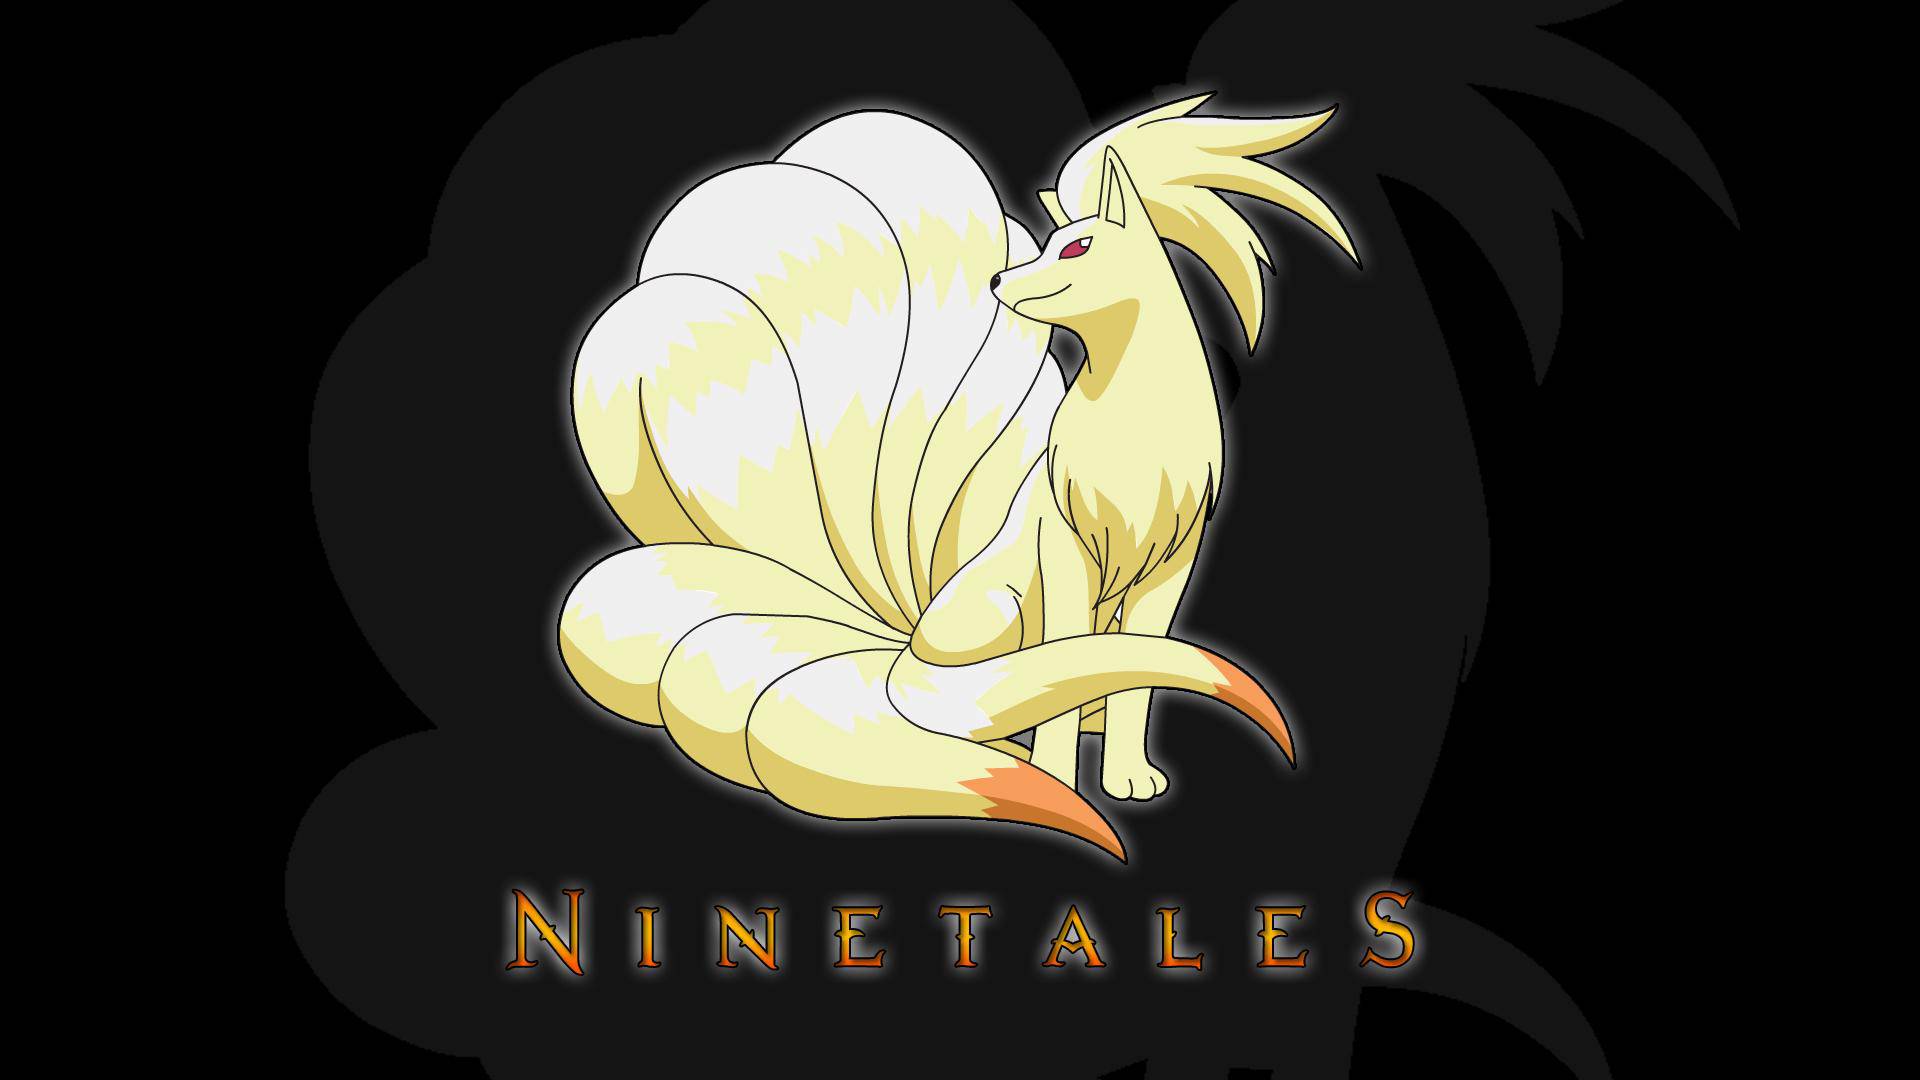 Ninetails thats what needed wallpaper - High Quality